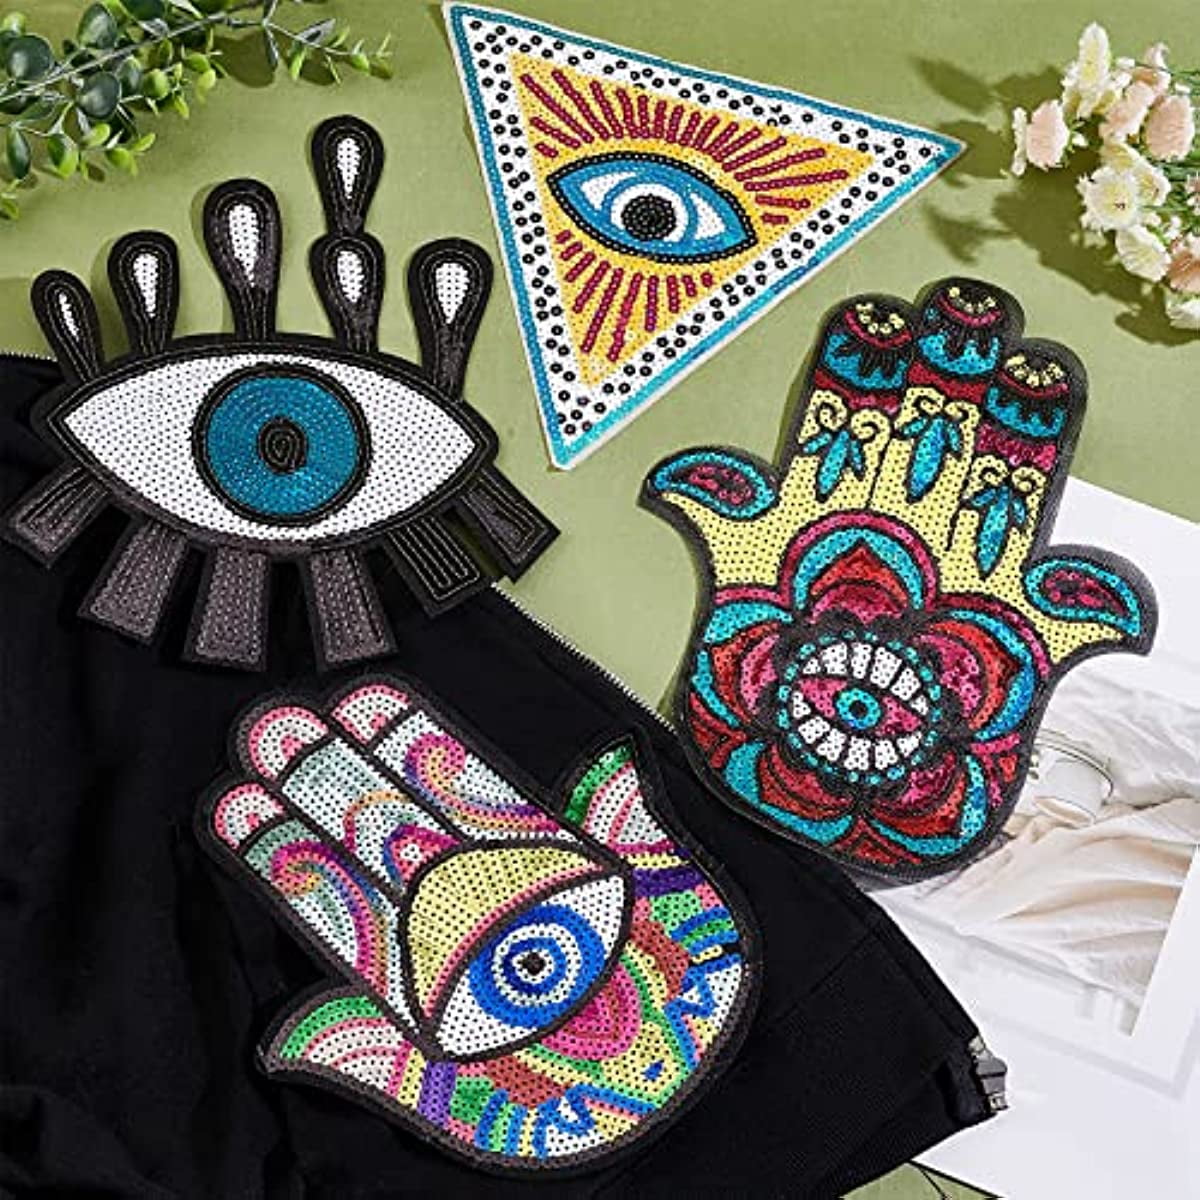 HHO Big Jumbo Evil Eye Patch All Seeing Eye Patch Logo Jacket T-shirt Sew  Iron on Patch Sew Iron on Embroidered Applique Collection Clothing Costume